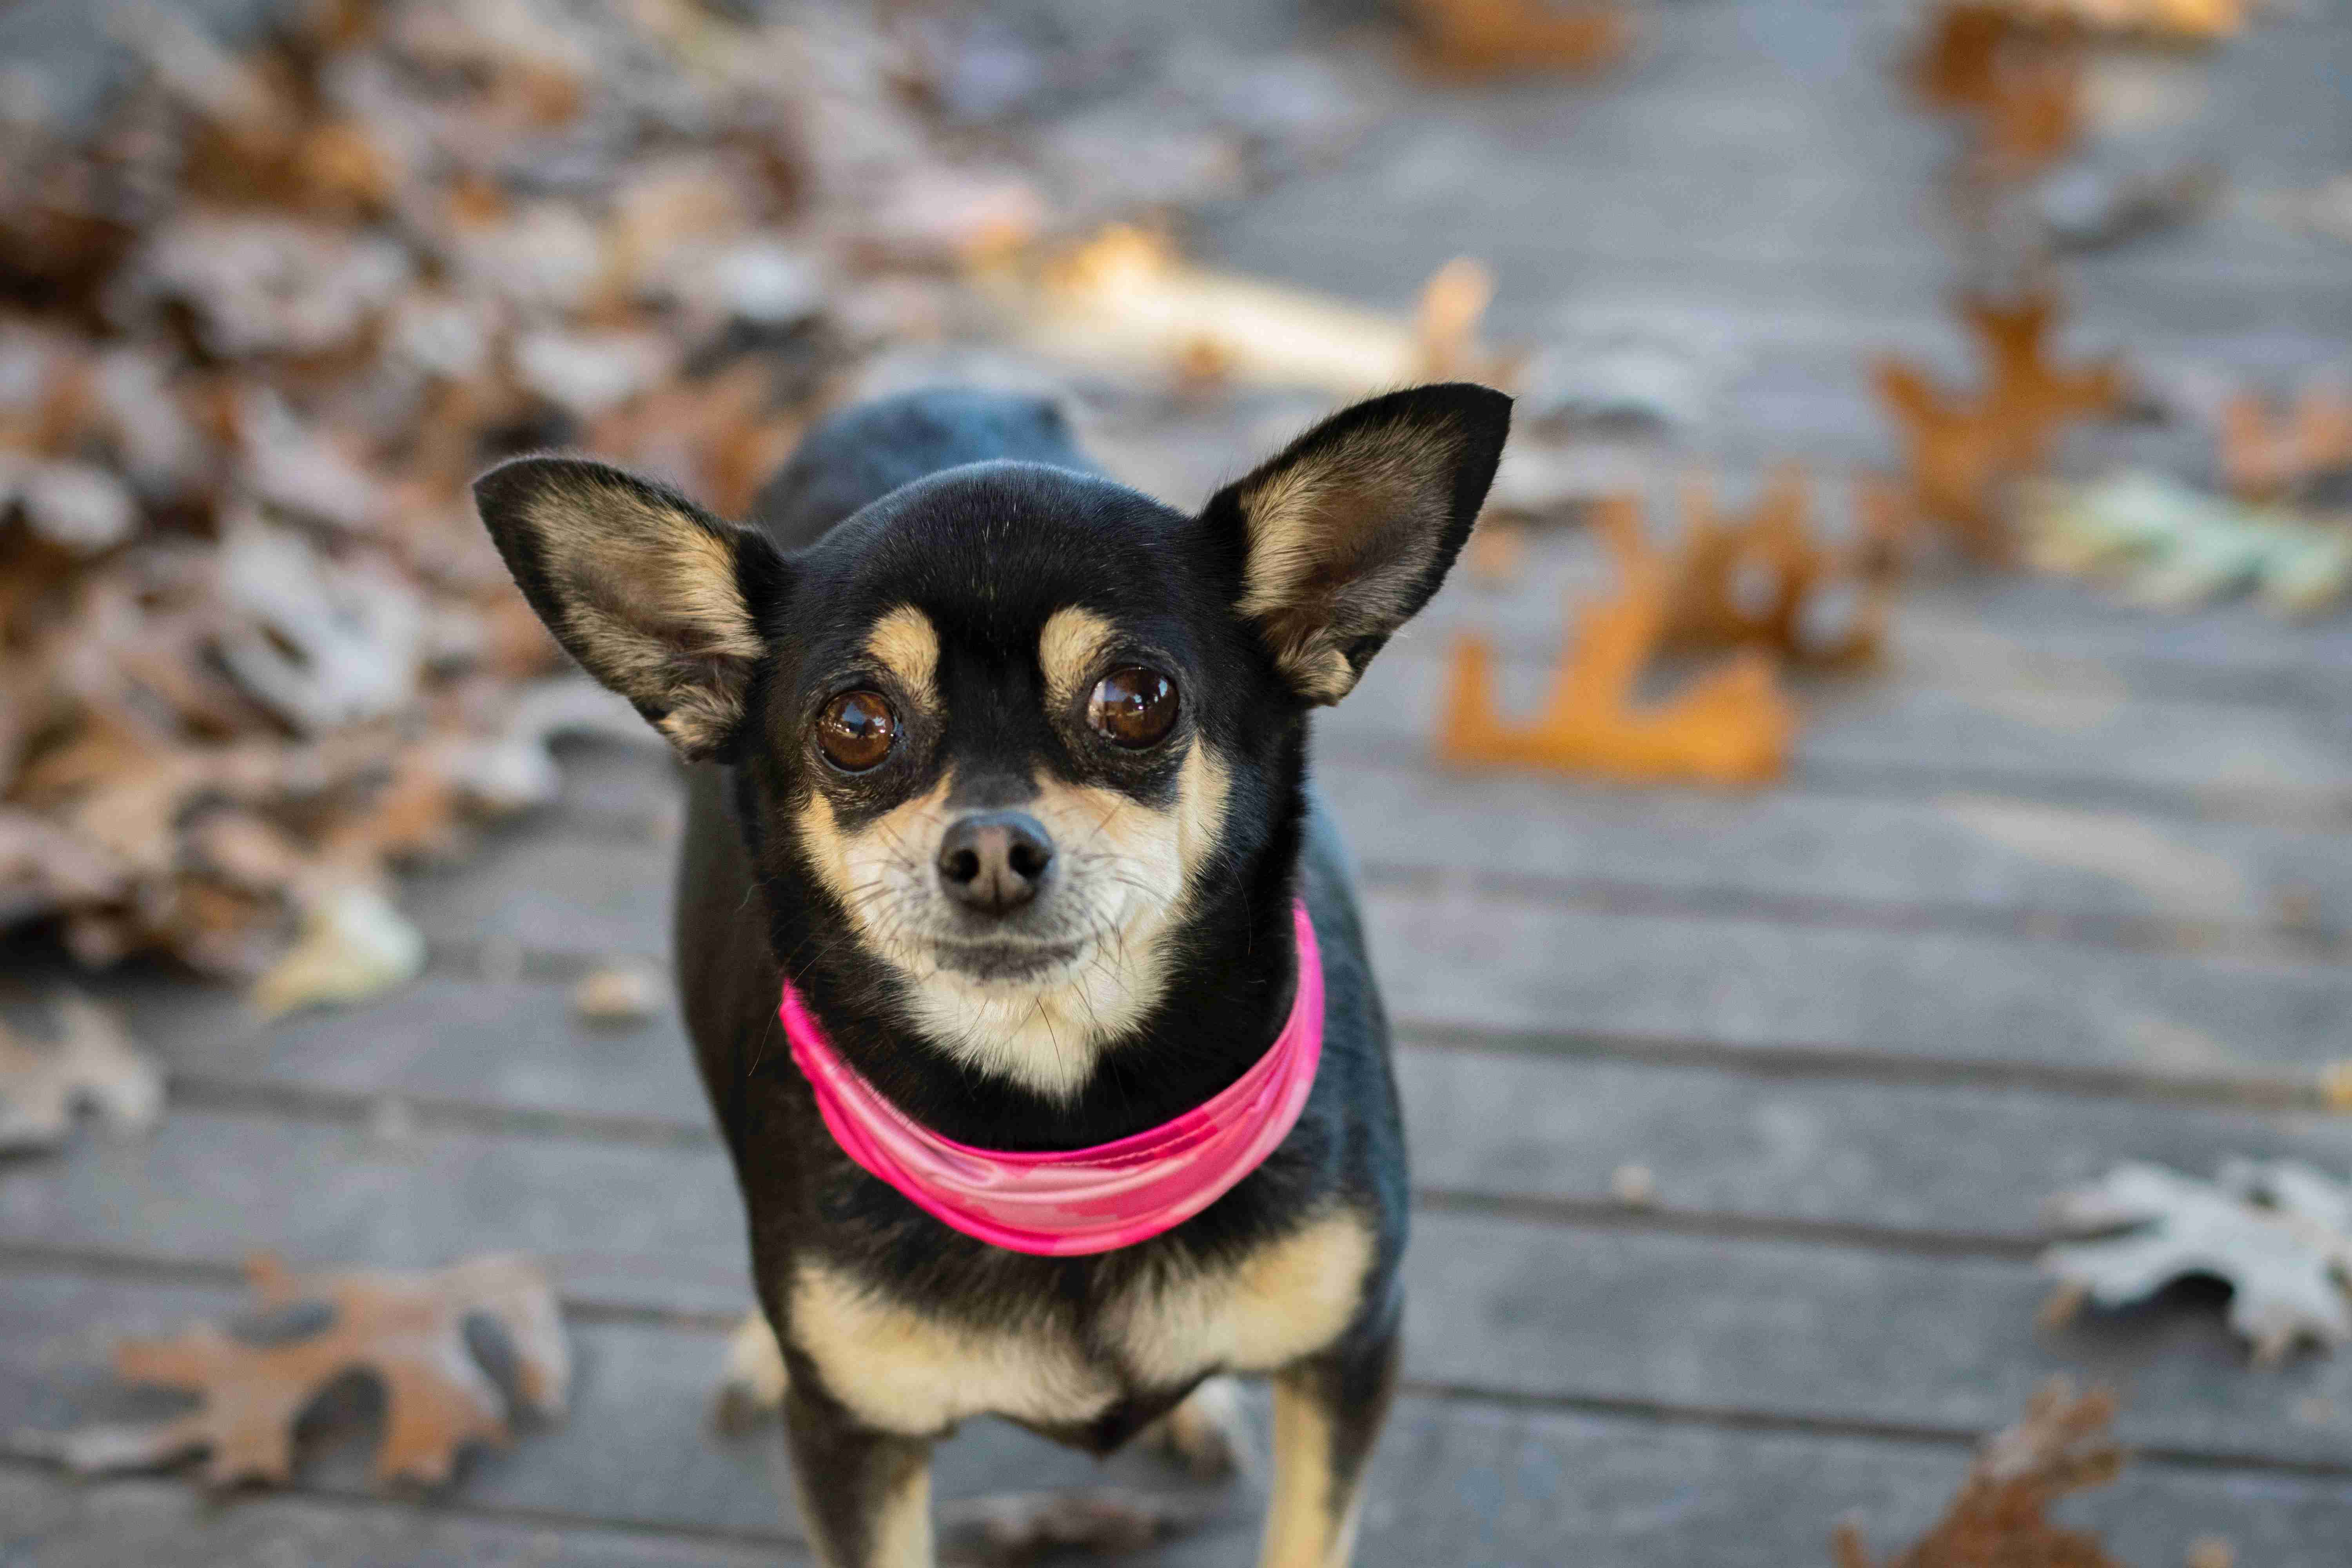 Is it possible for Chihuahuas to be aggressive towards their owners?